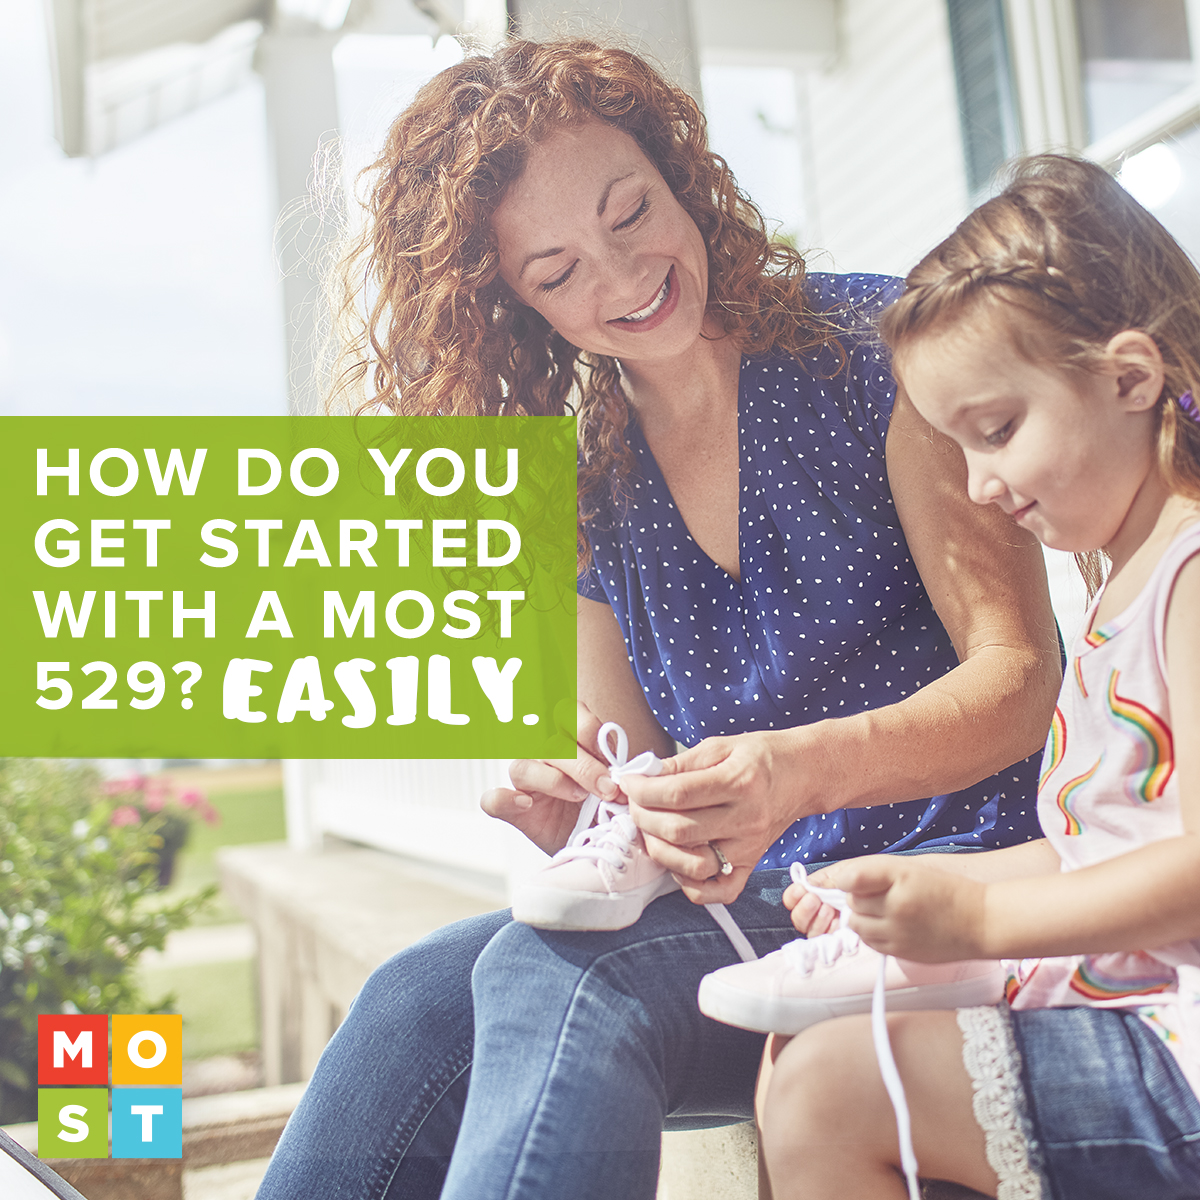 Are you ready to start saving for your child’s education? If the answer is yes, you can use this quick guide to open a MOST 529 account in minutes. 👉 missourimost.org/home/getting-s…